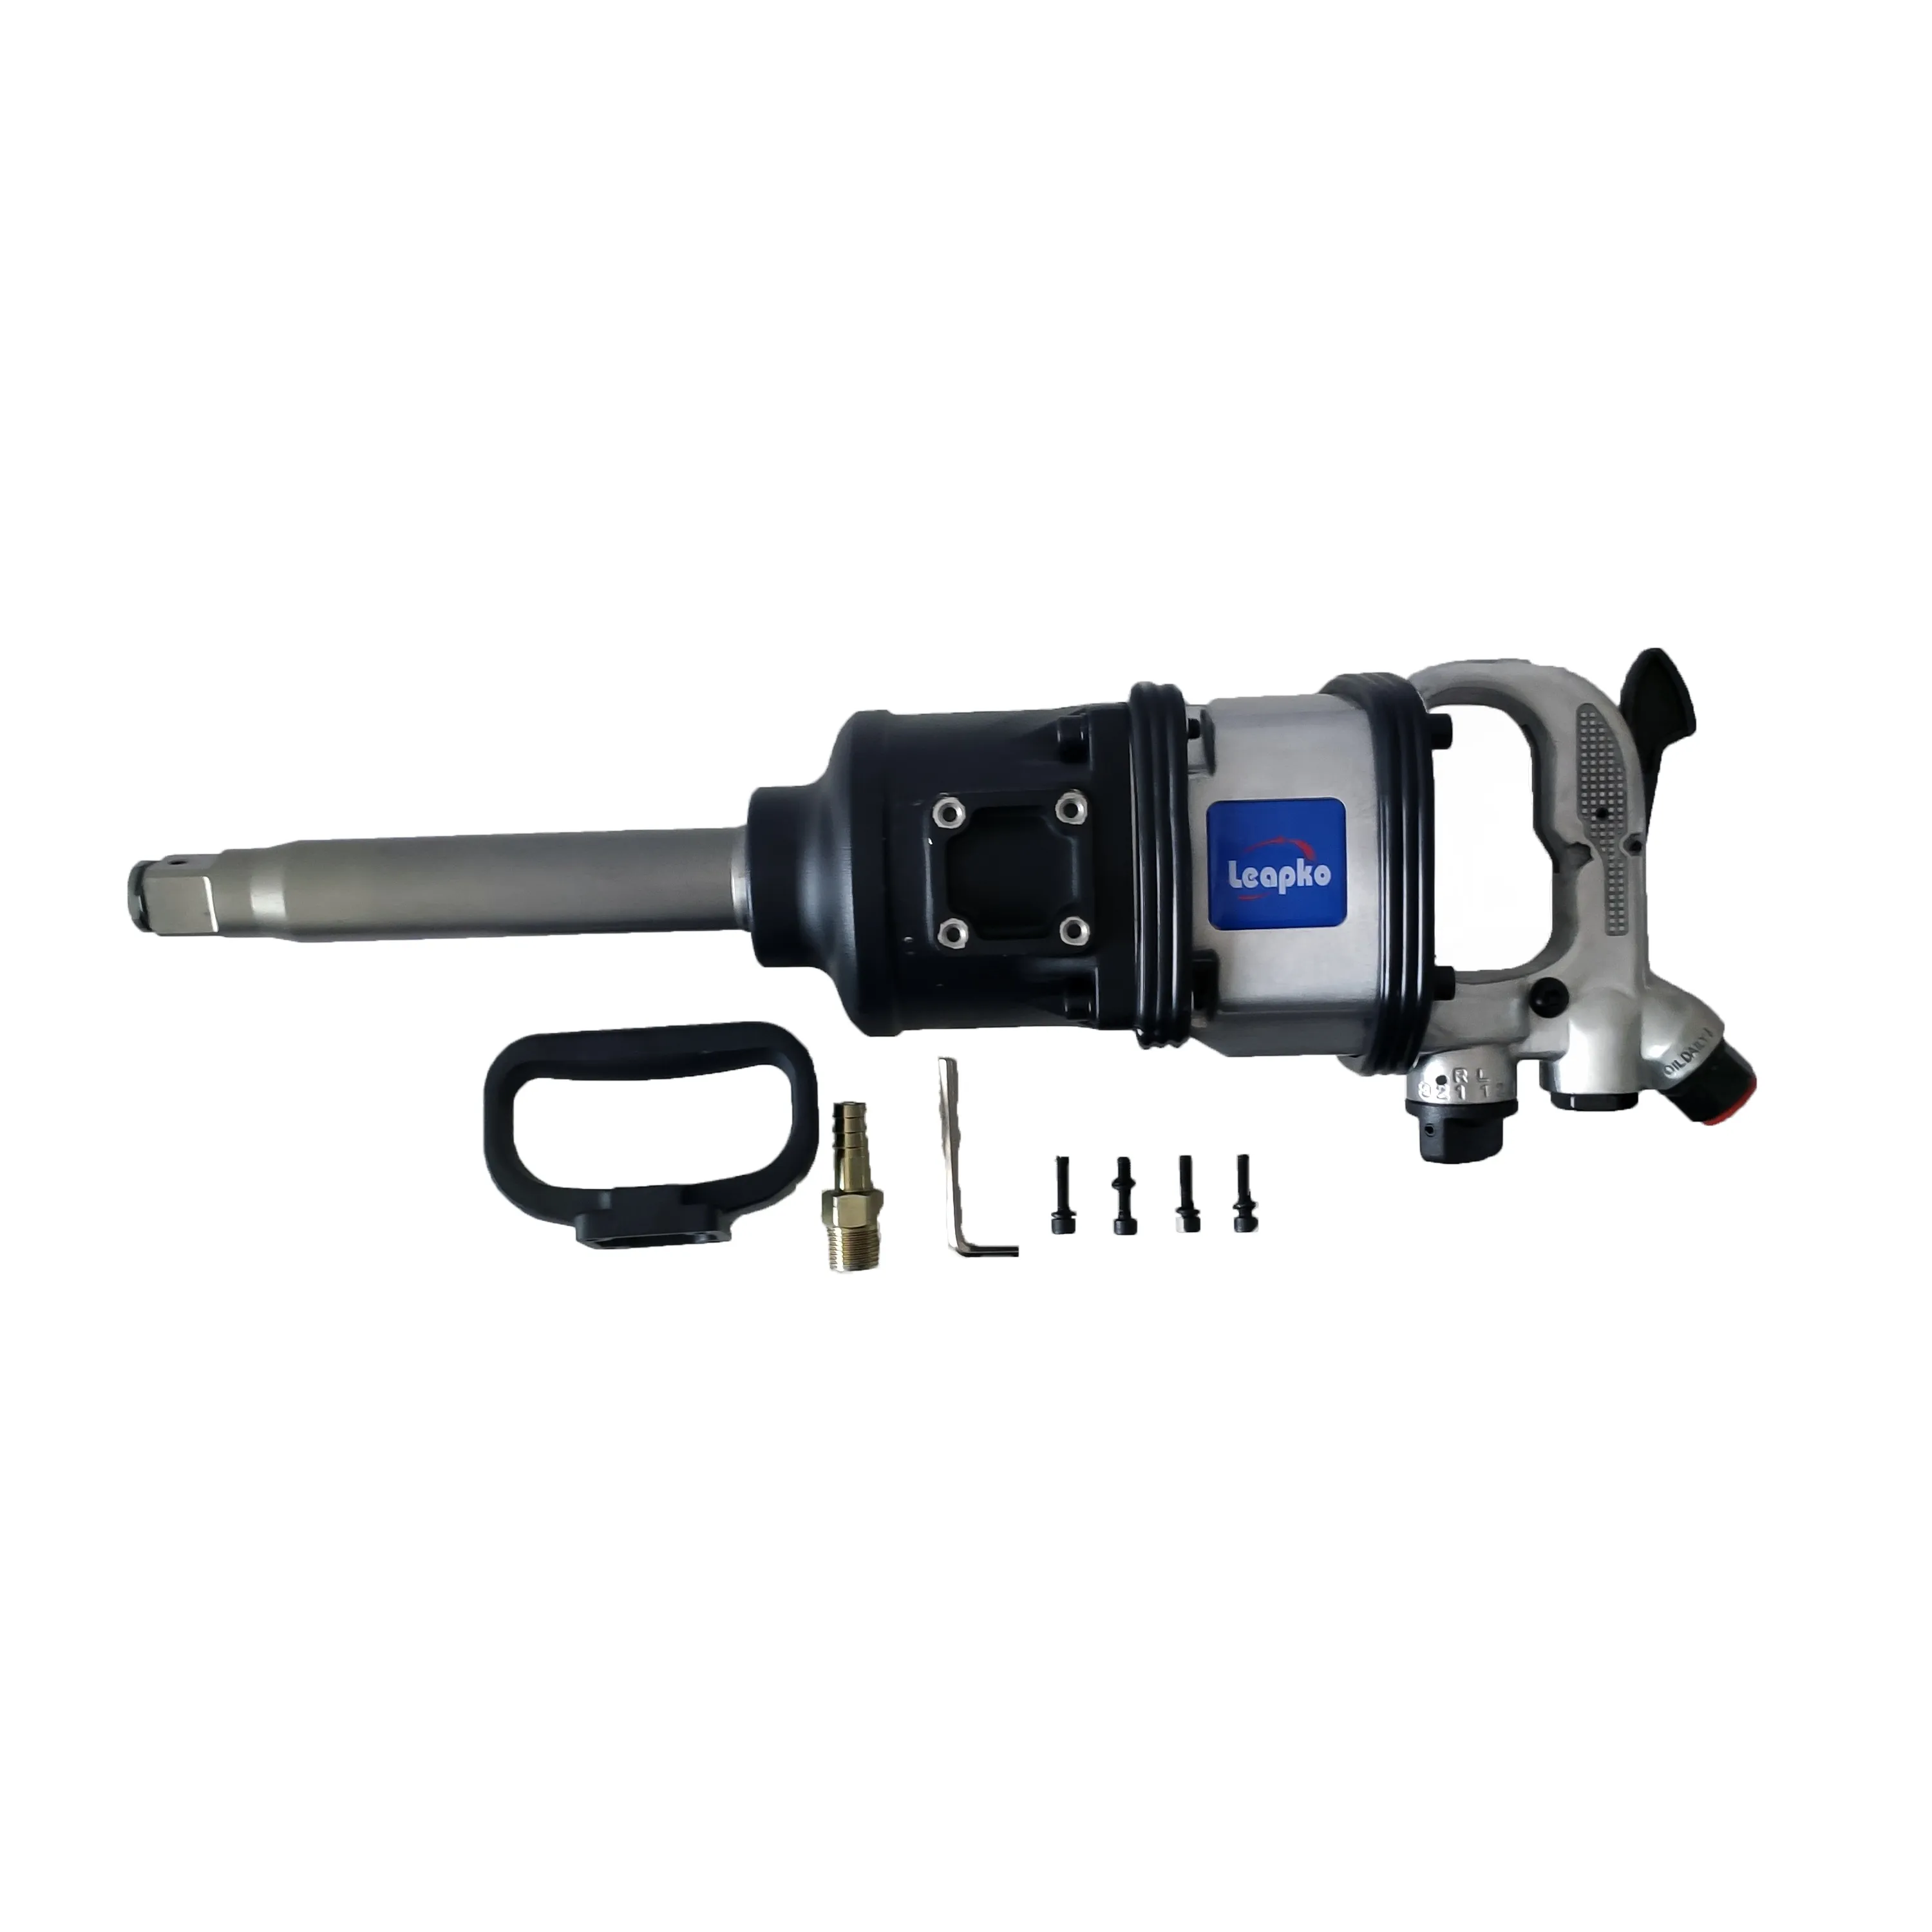 JAPAN QUALITY Air Impact Wrench Pneumatic Impact Wrench AIR PNEUMATIC TOOLS 1" Impact Wrench air power tools